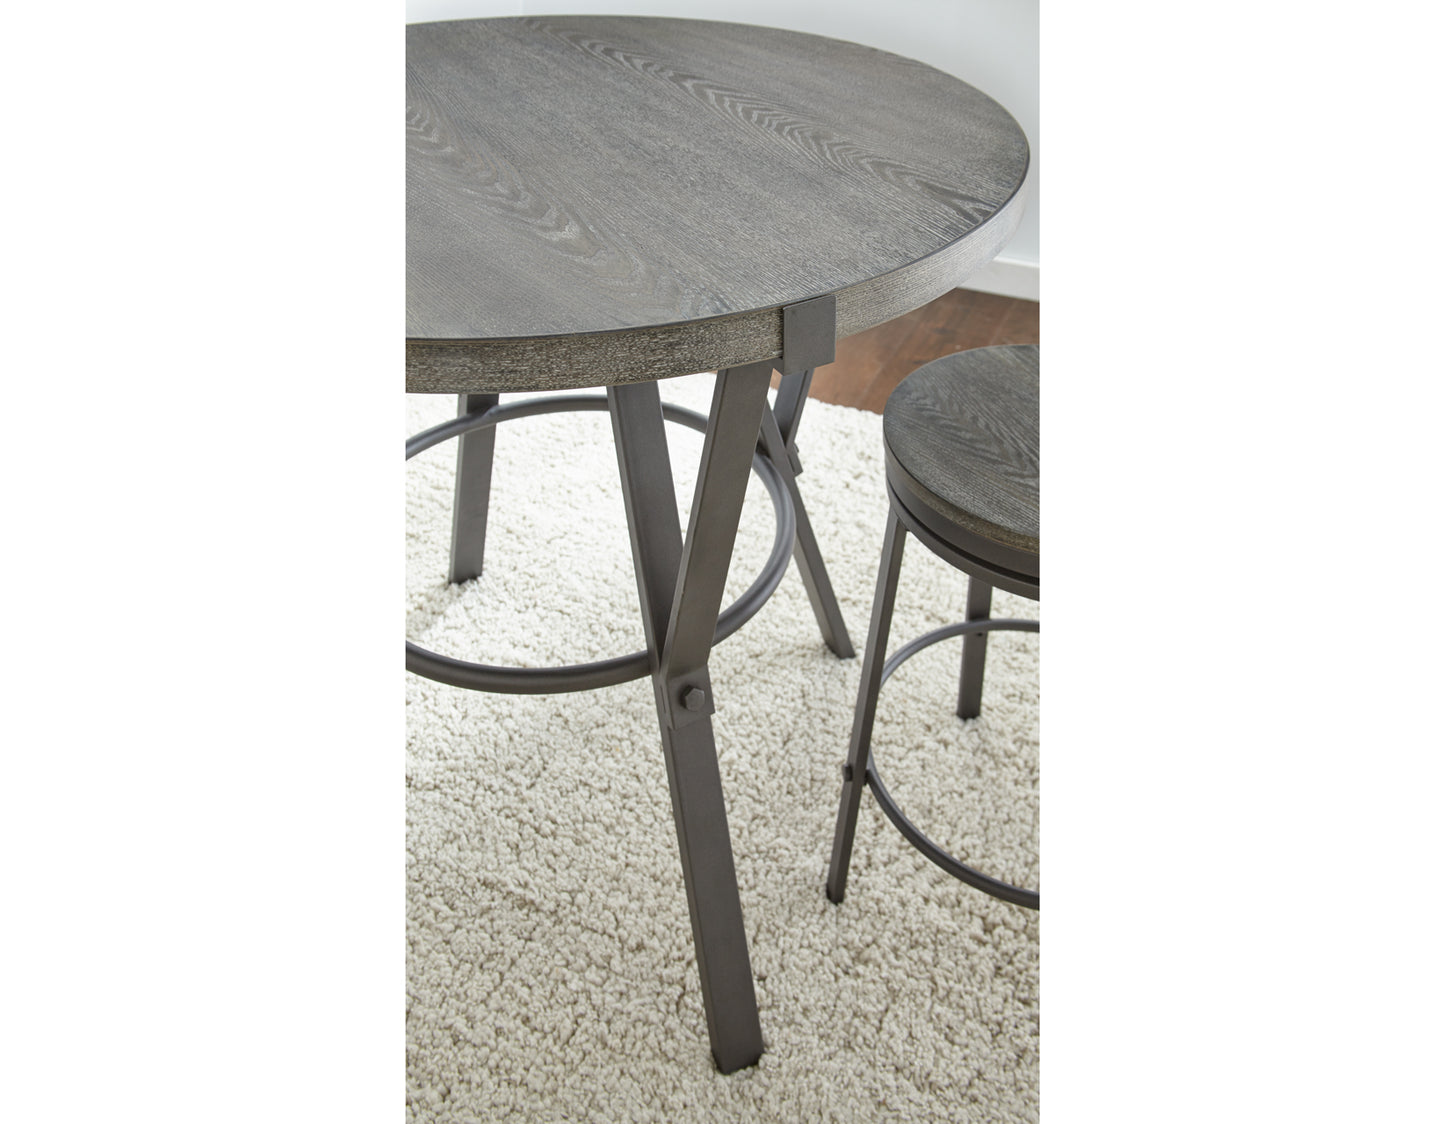 Portland 5 Piece 42-inch Round Counter Dining Set
(Table & 4 Counter Stool’s)